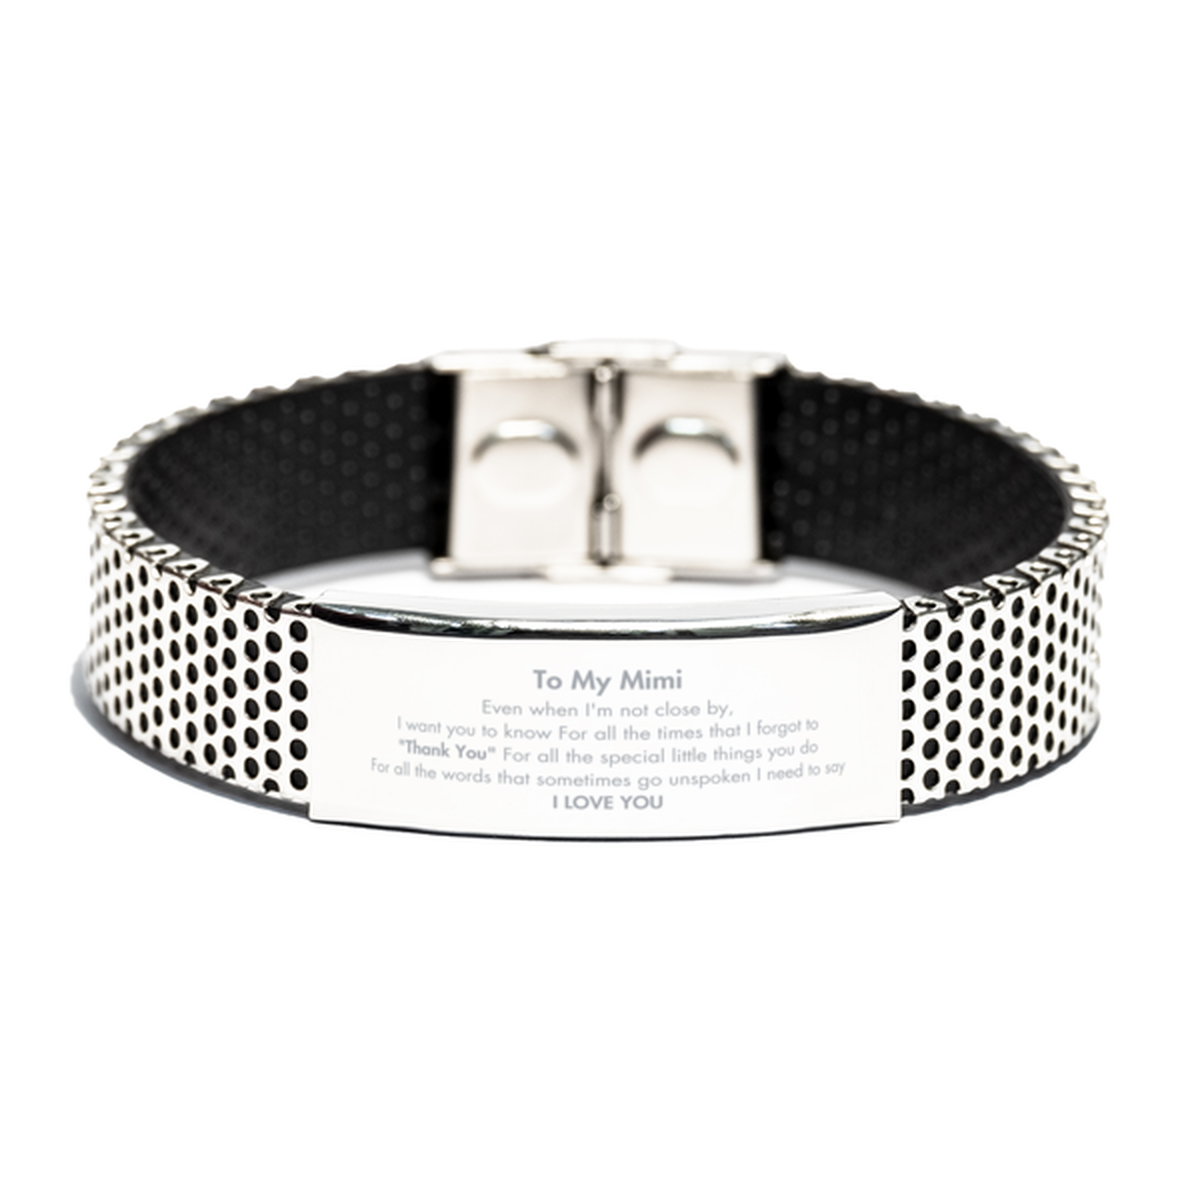 Thank You Gifts for Mimi, Keepsake Stainless Steel Bracelet Gifts for Mimi Birthday Mother's day Father's Day Mimi For all the words That sometimes go unspoken I need to say I LOVE YOU